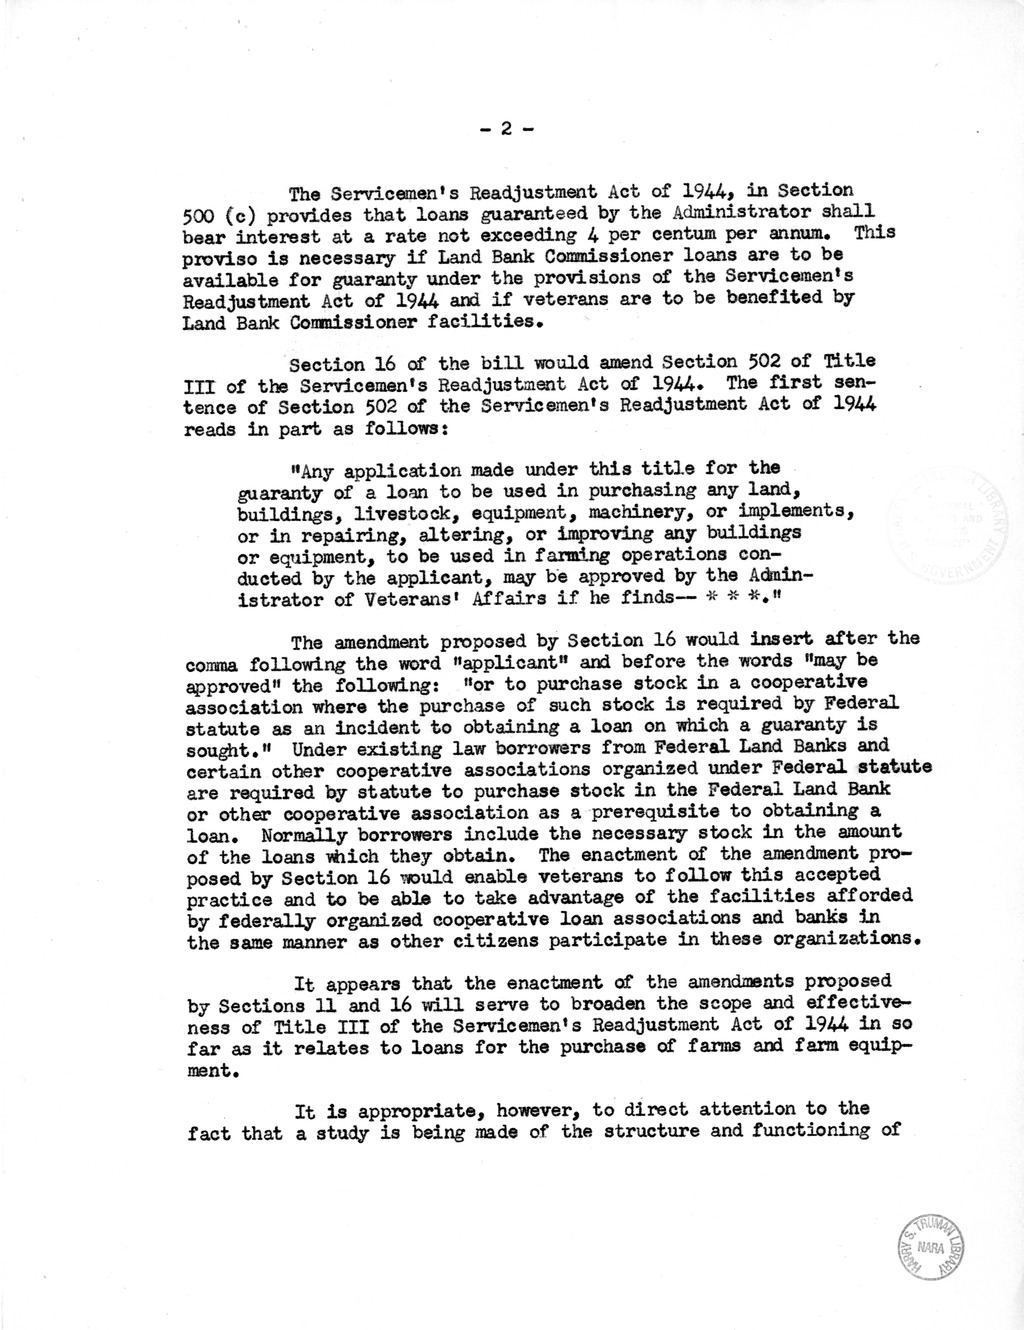 Memorandum from Harold D. Smith to M. C. Latta, H.R. 2113, To Amend the Federal Farm Loan Act, the Emergency Farm Mortgage Act of 1933, The Servicemen's Readjustment Act of 1944, and for Other Purposes, with Attachments